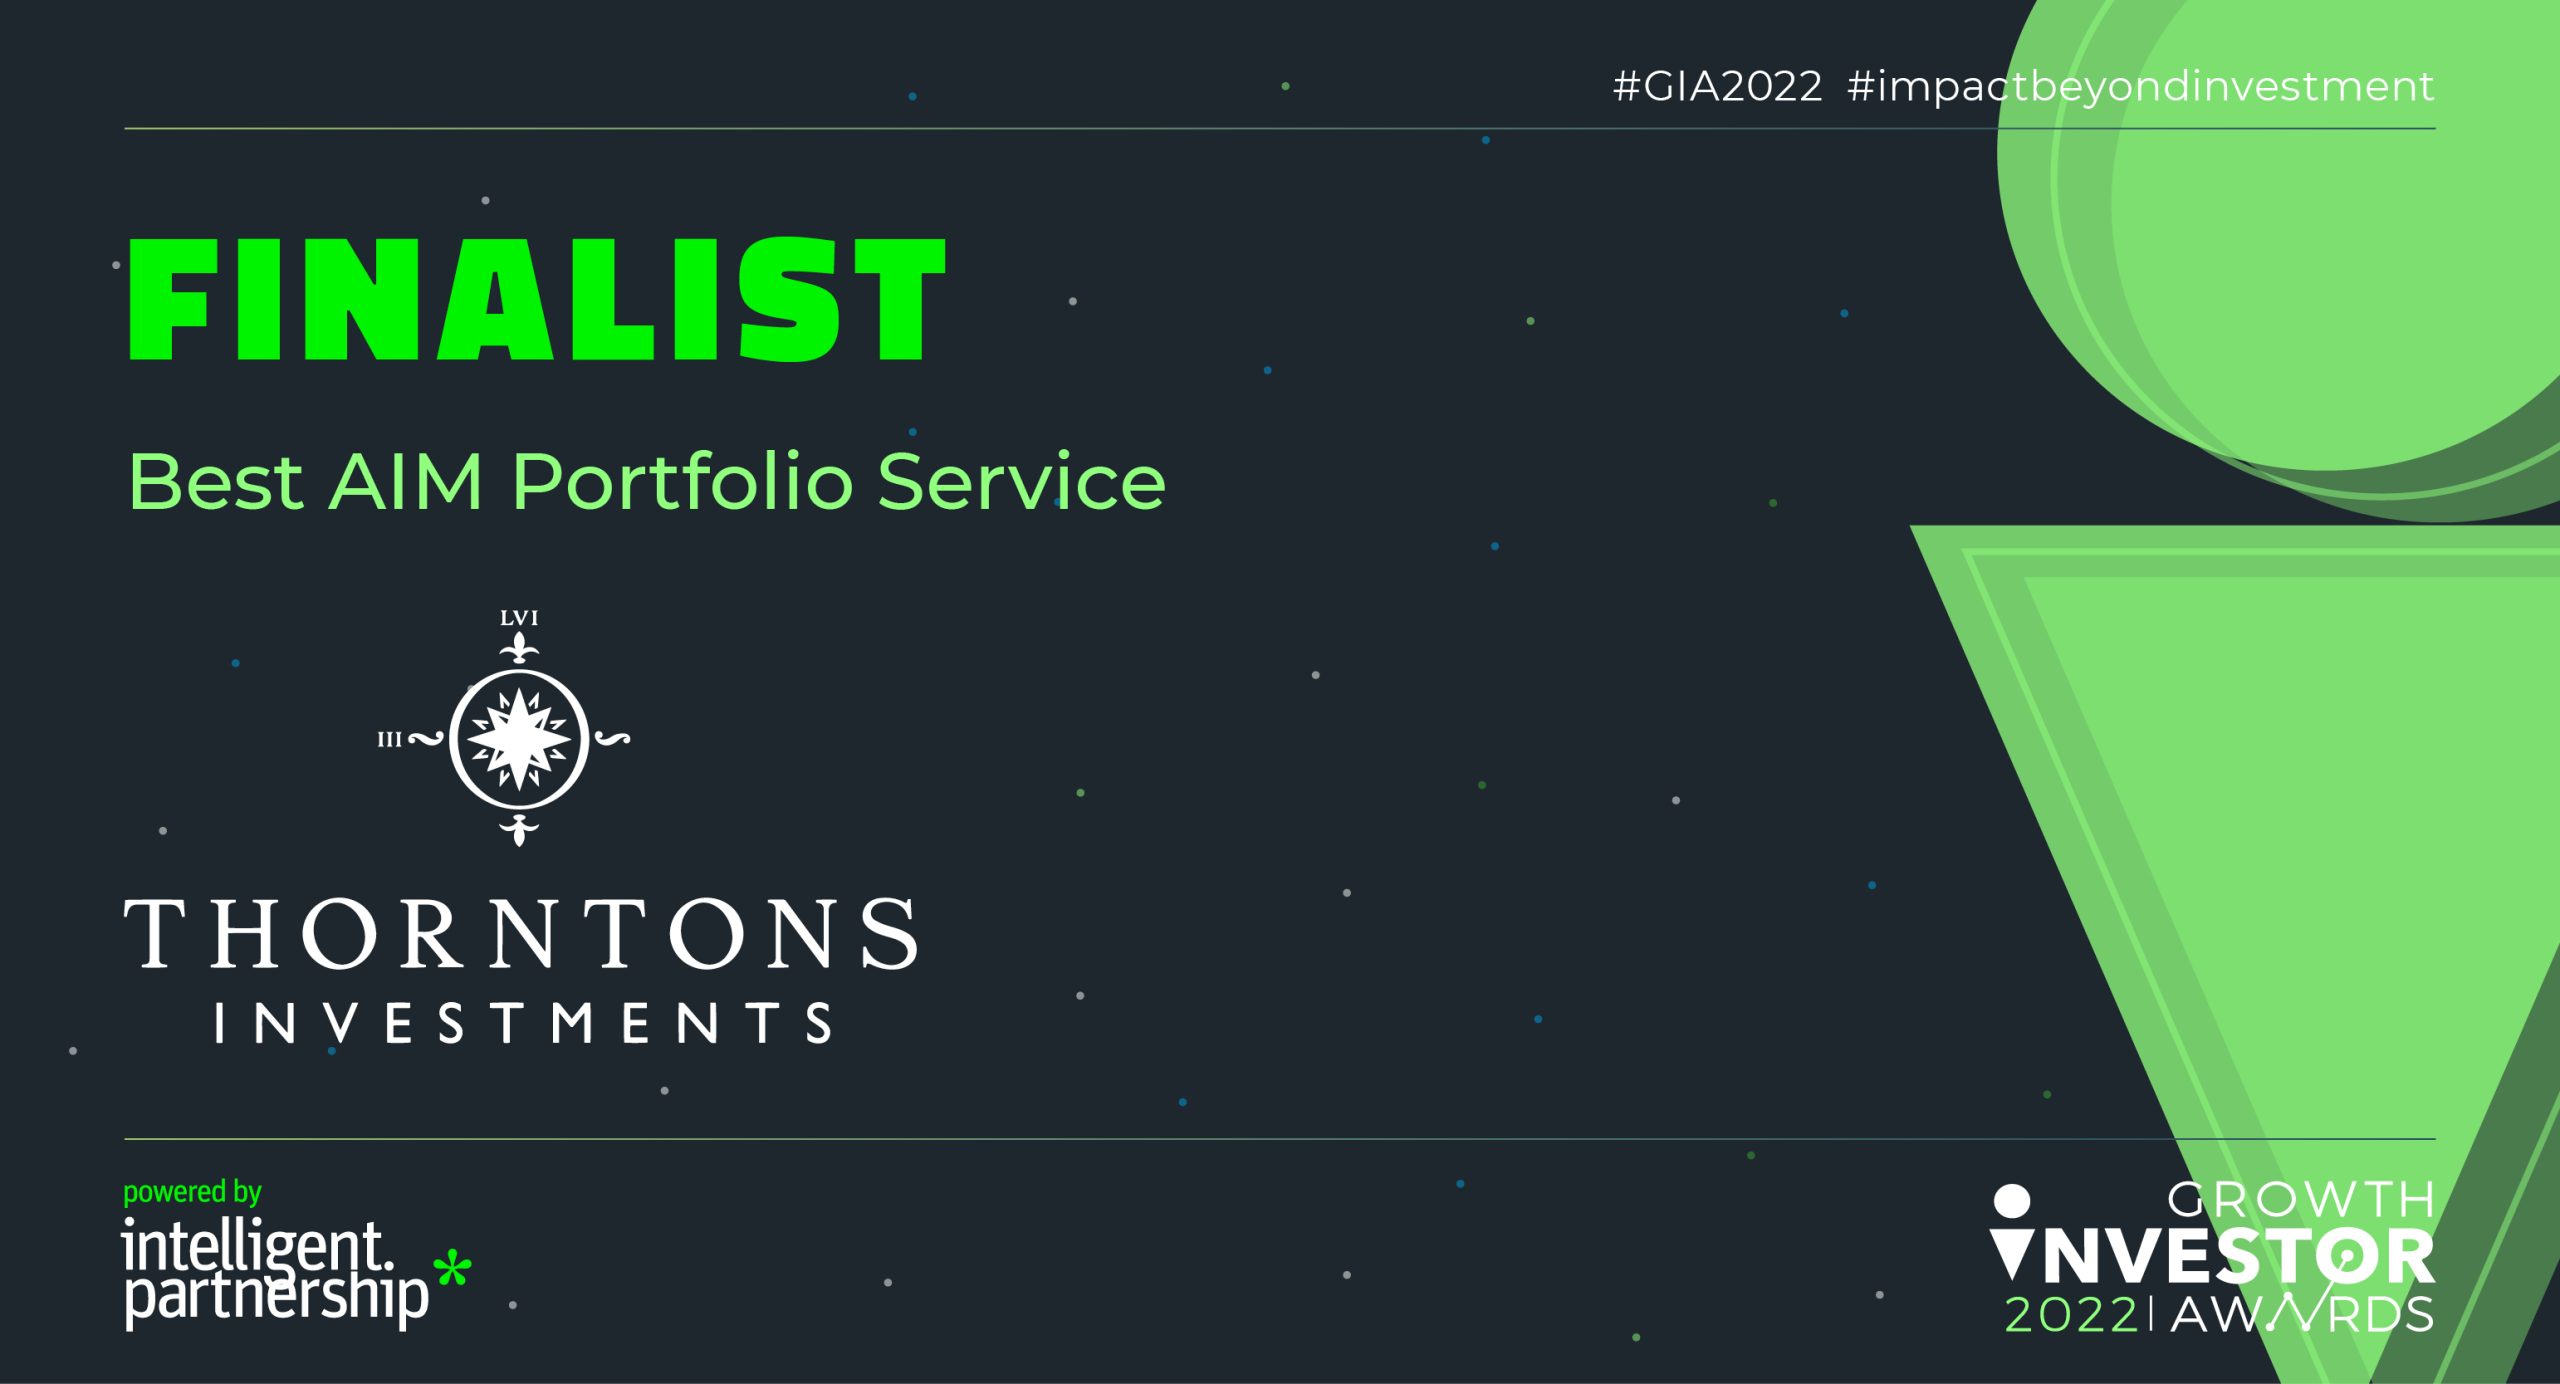 Thorntons Investments shortlisted for Best AIM Portfolio Service